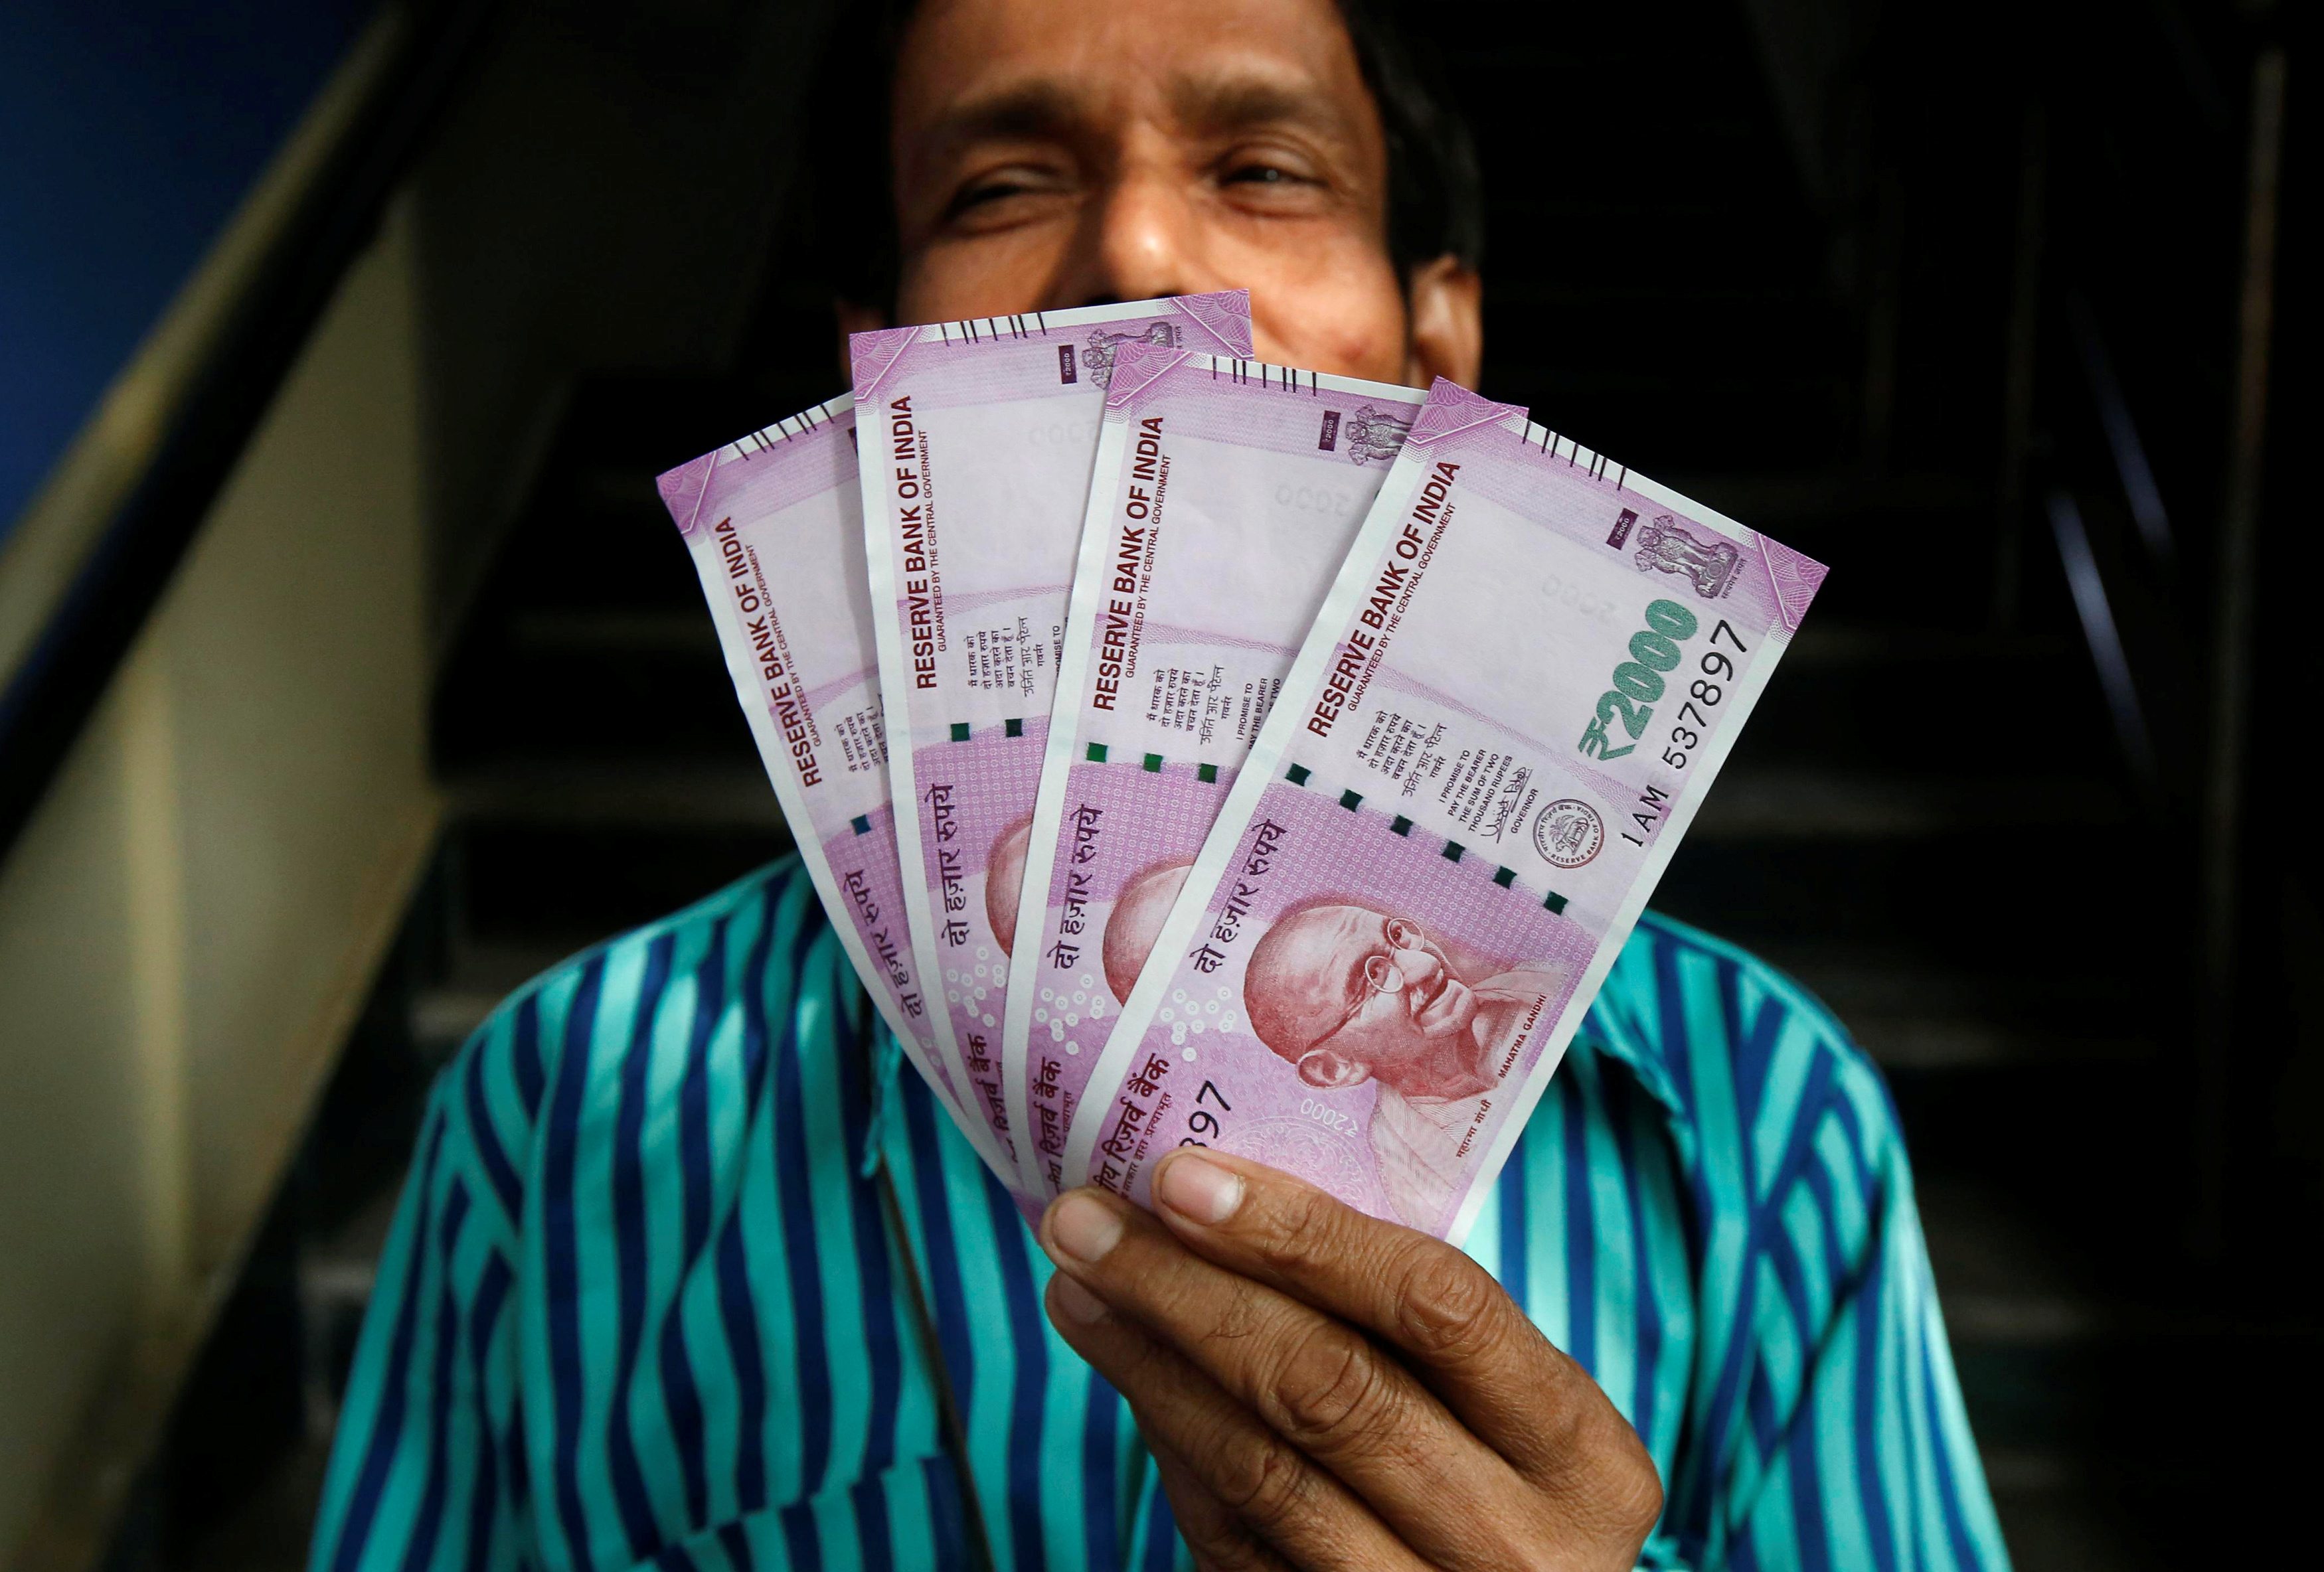 A man displays new 2000 Indian rupee banknotes after withdrawing them from a State Bank of India branch in Kolkata